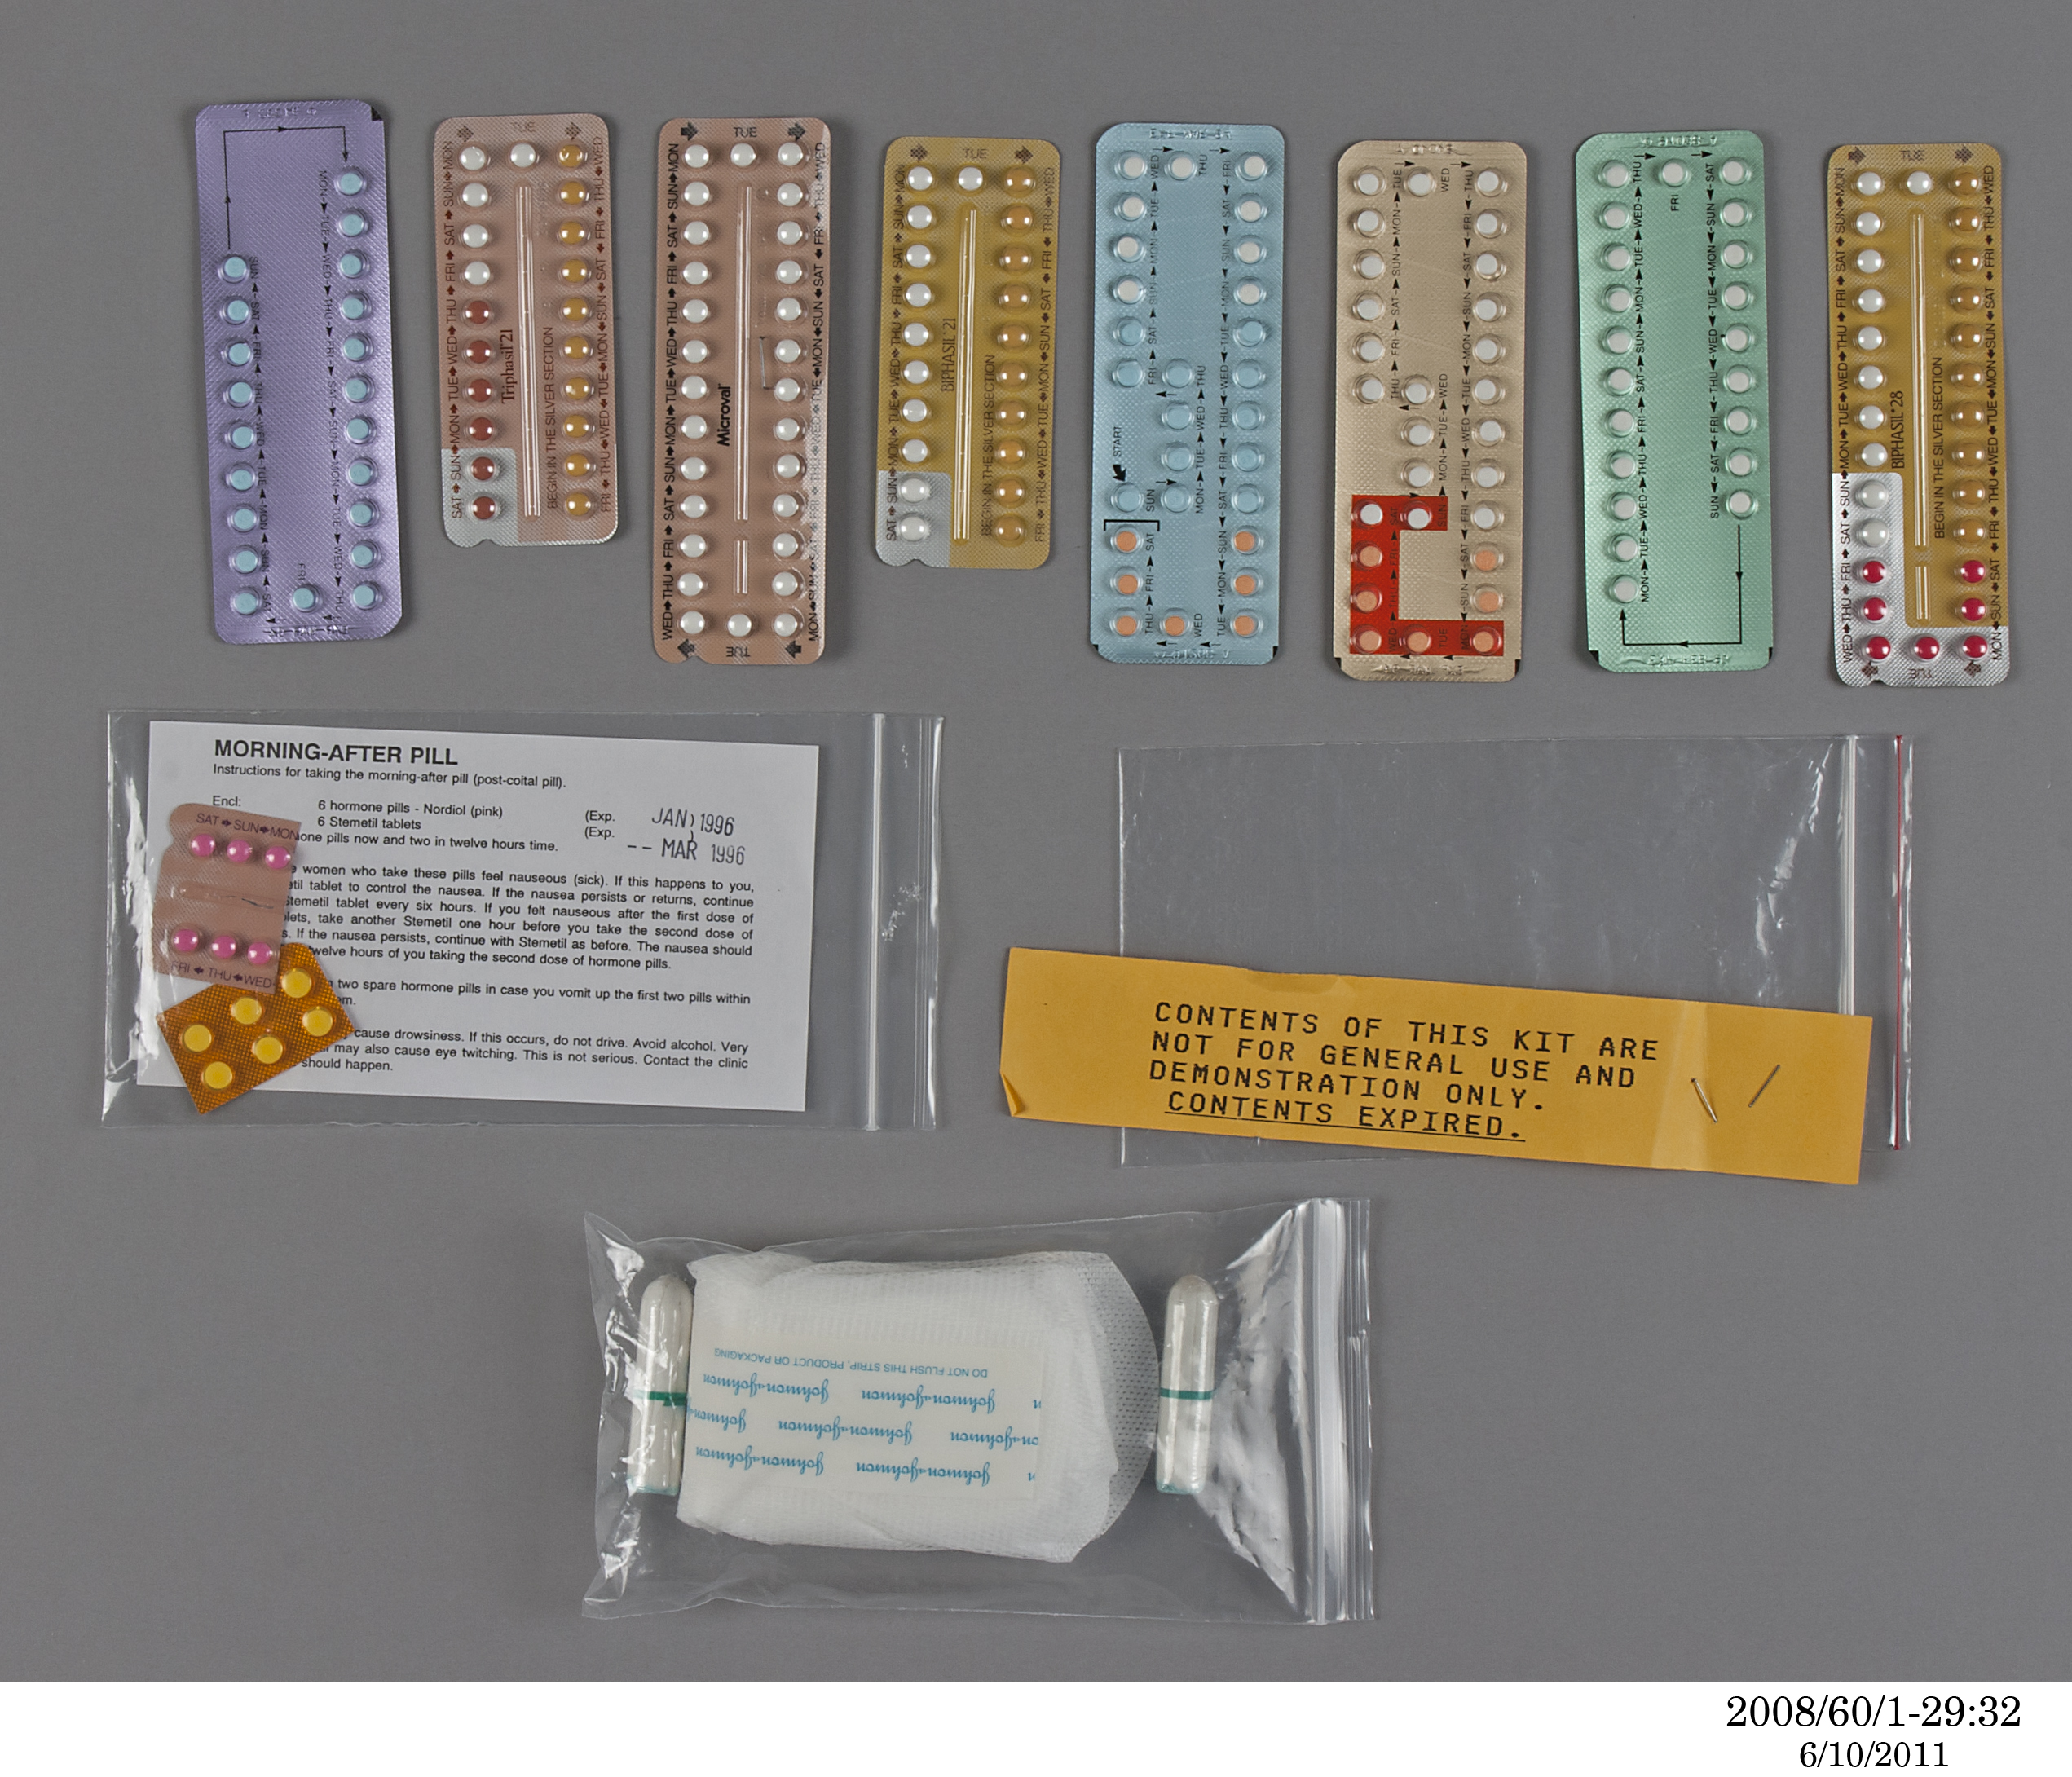 Contraceptive Teaching Kit made by The Family Planning Association of New South Wales